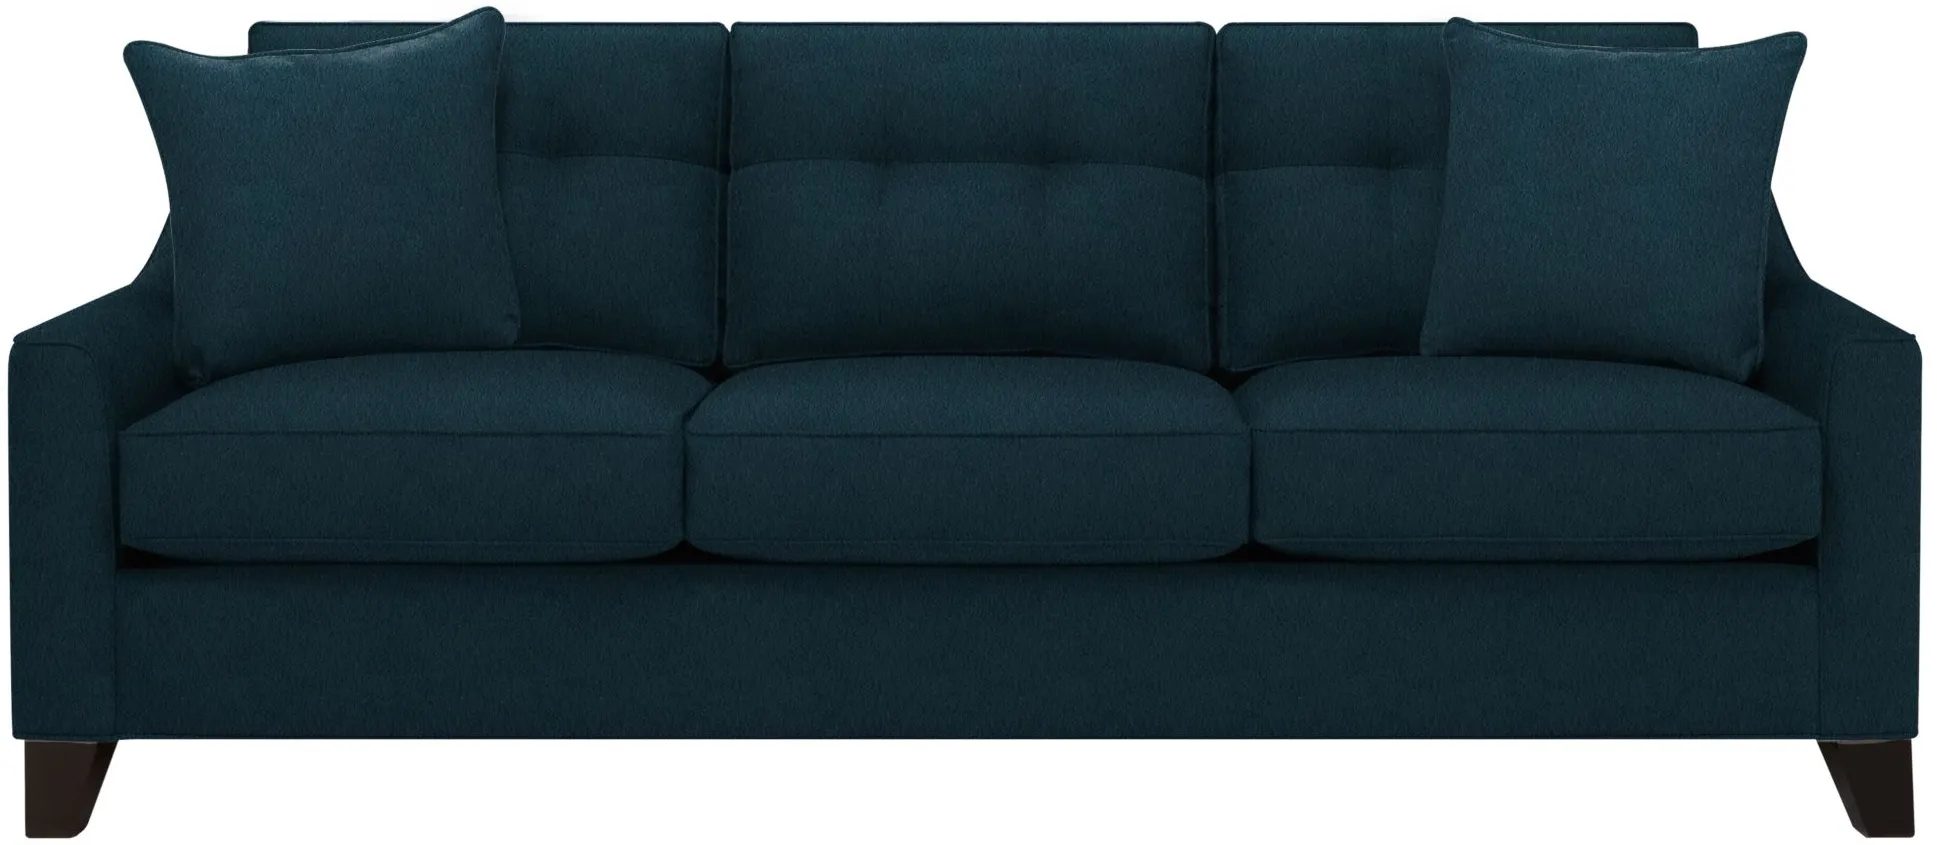 Carmine Queen Sleeper Sofa in Suede So Soft Midnight by H.M. Richards